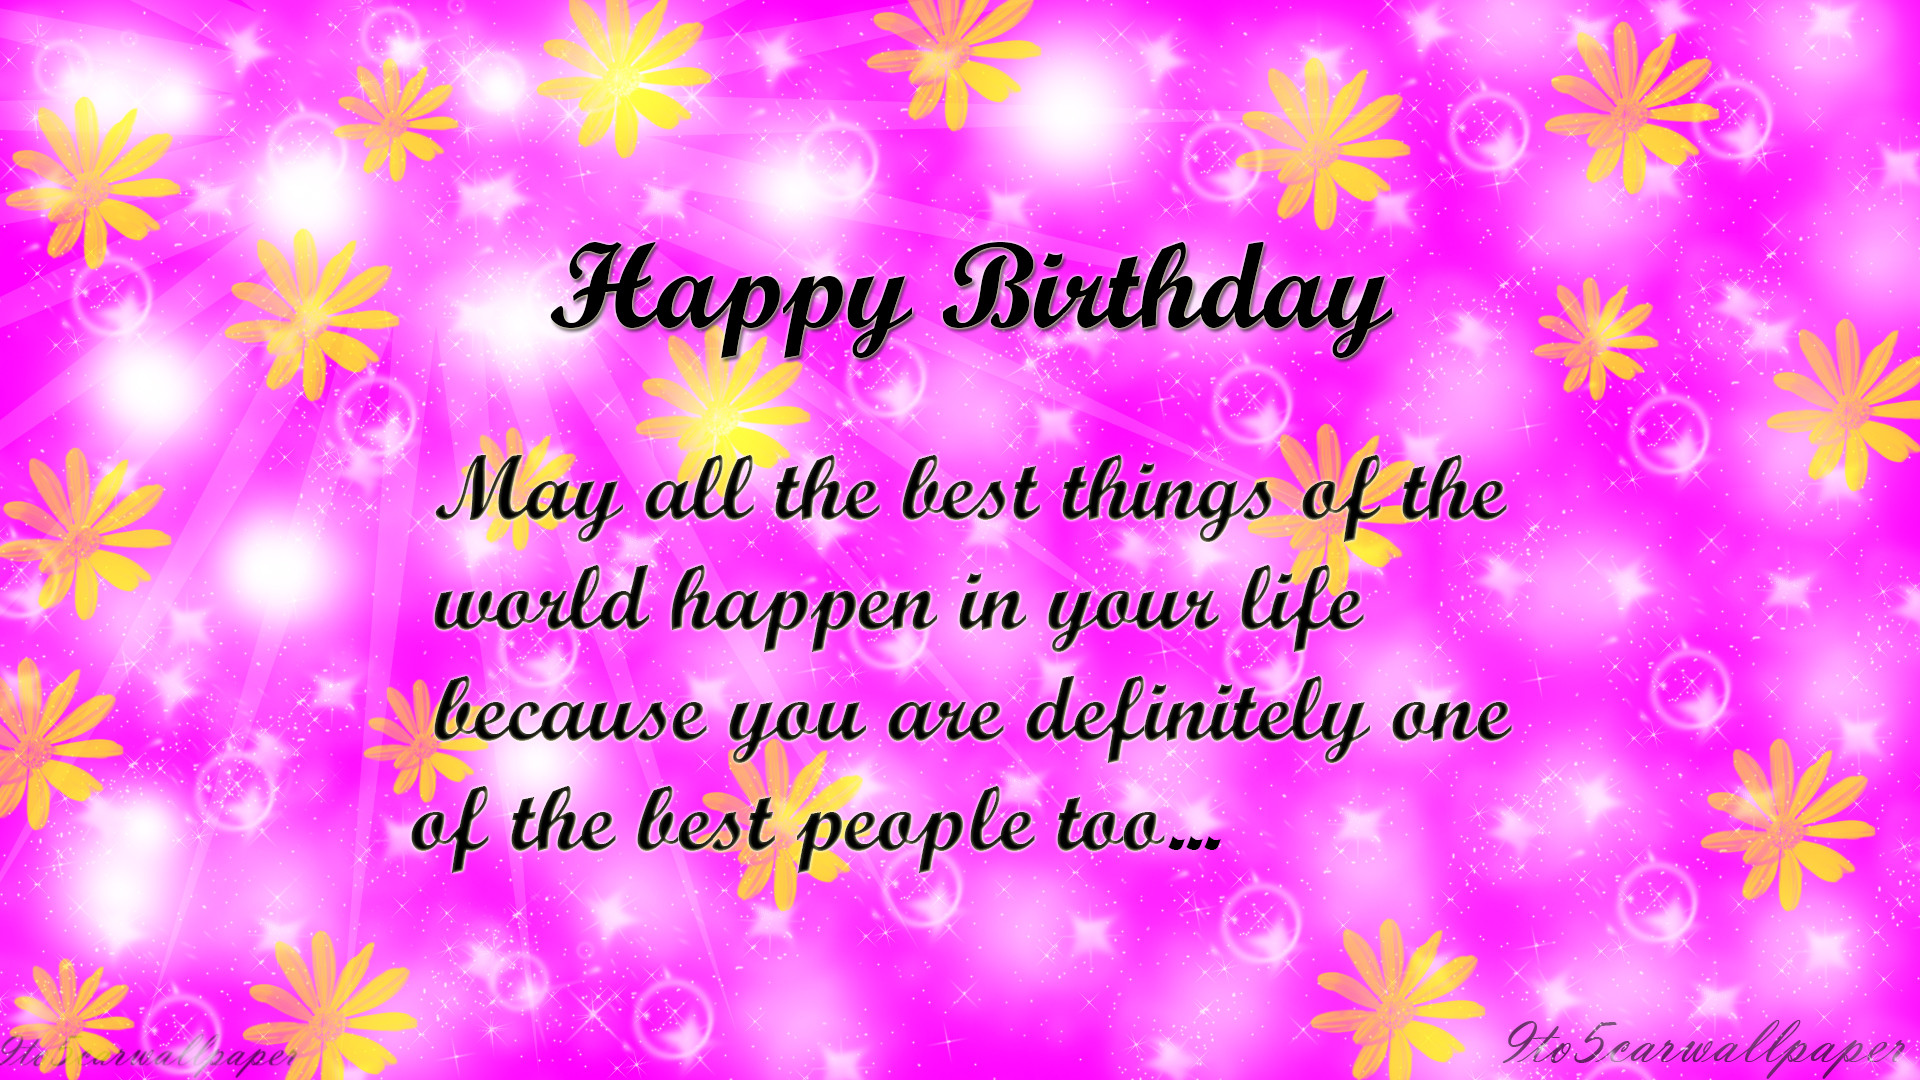 Image Of Birthday Wishes
 Best Birthday Quotes and Wallpapers My Site